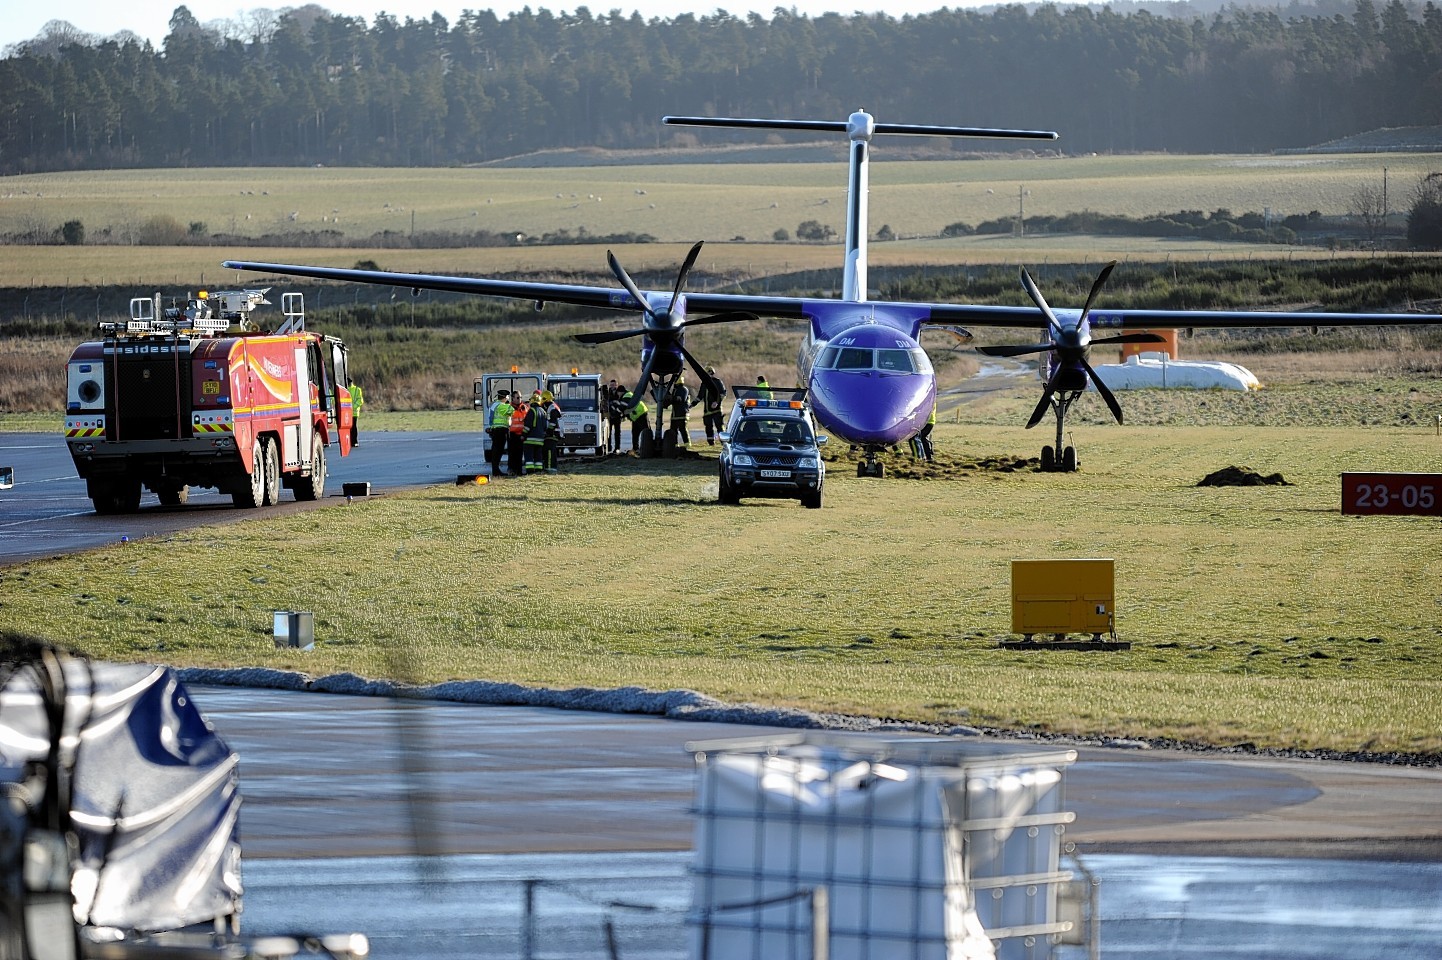 The plane was carrying 48 passengers when it veered off the runway